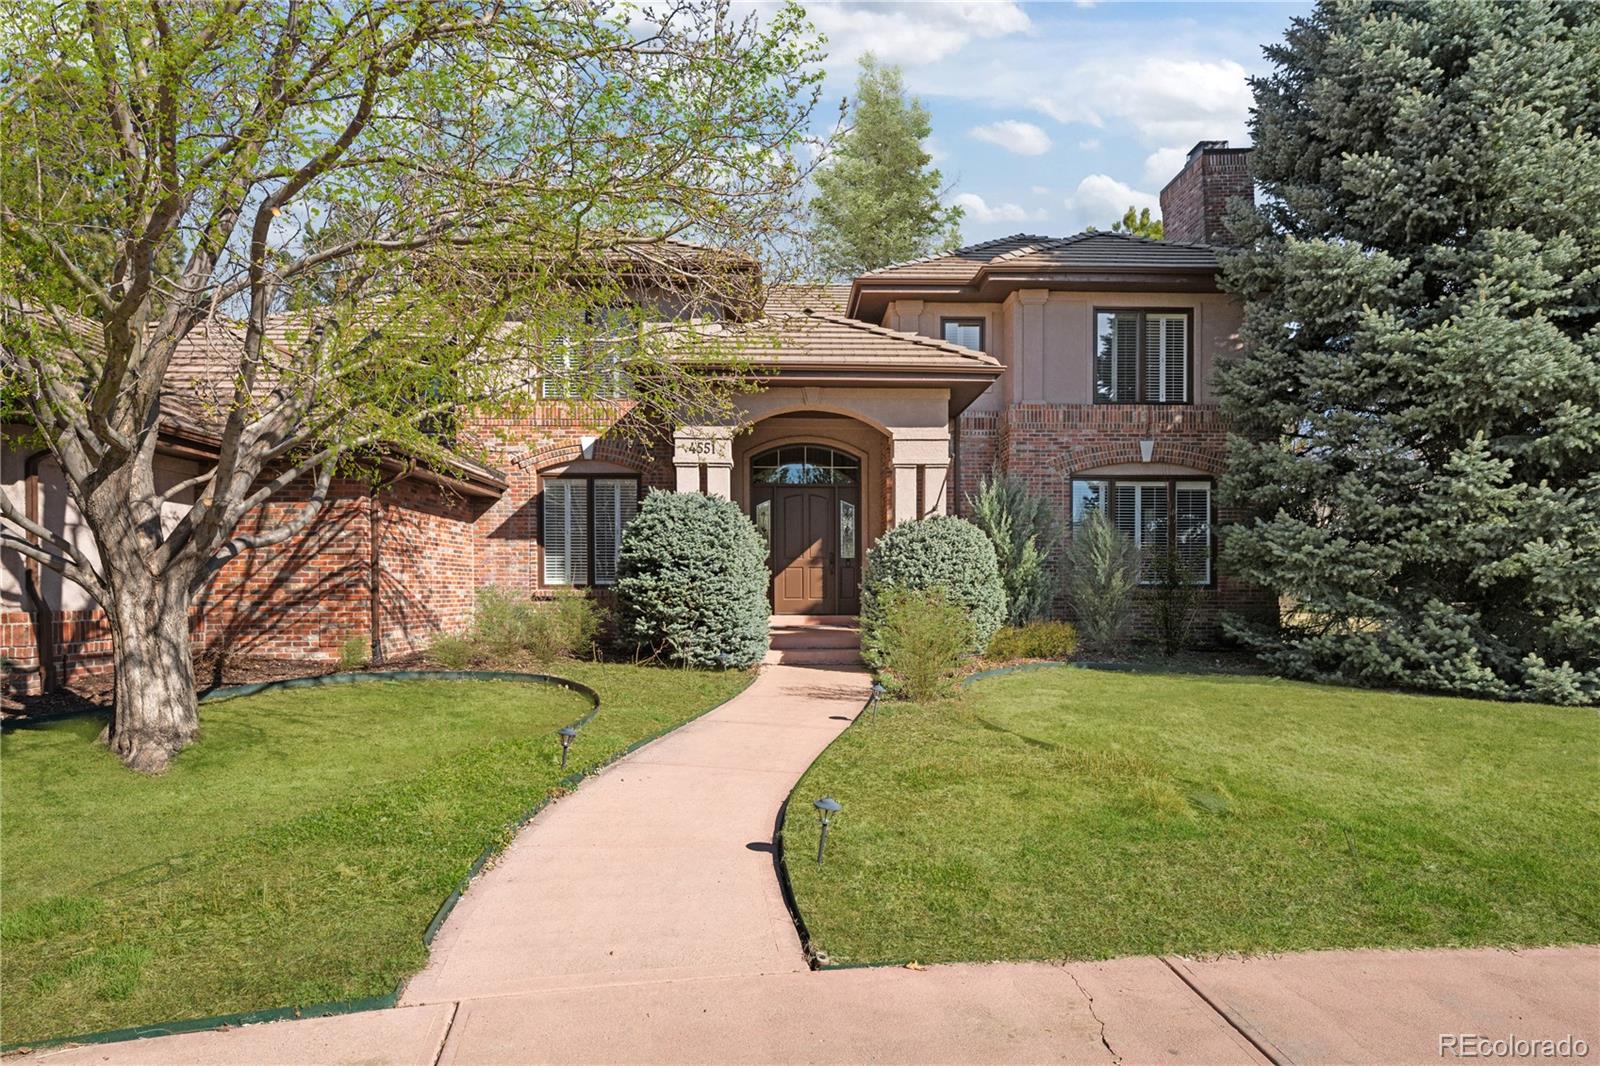 Report Image for 4551 E Perry Parkway,Greenwood Village, Colorado